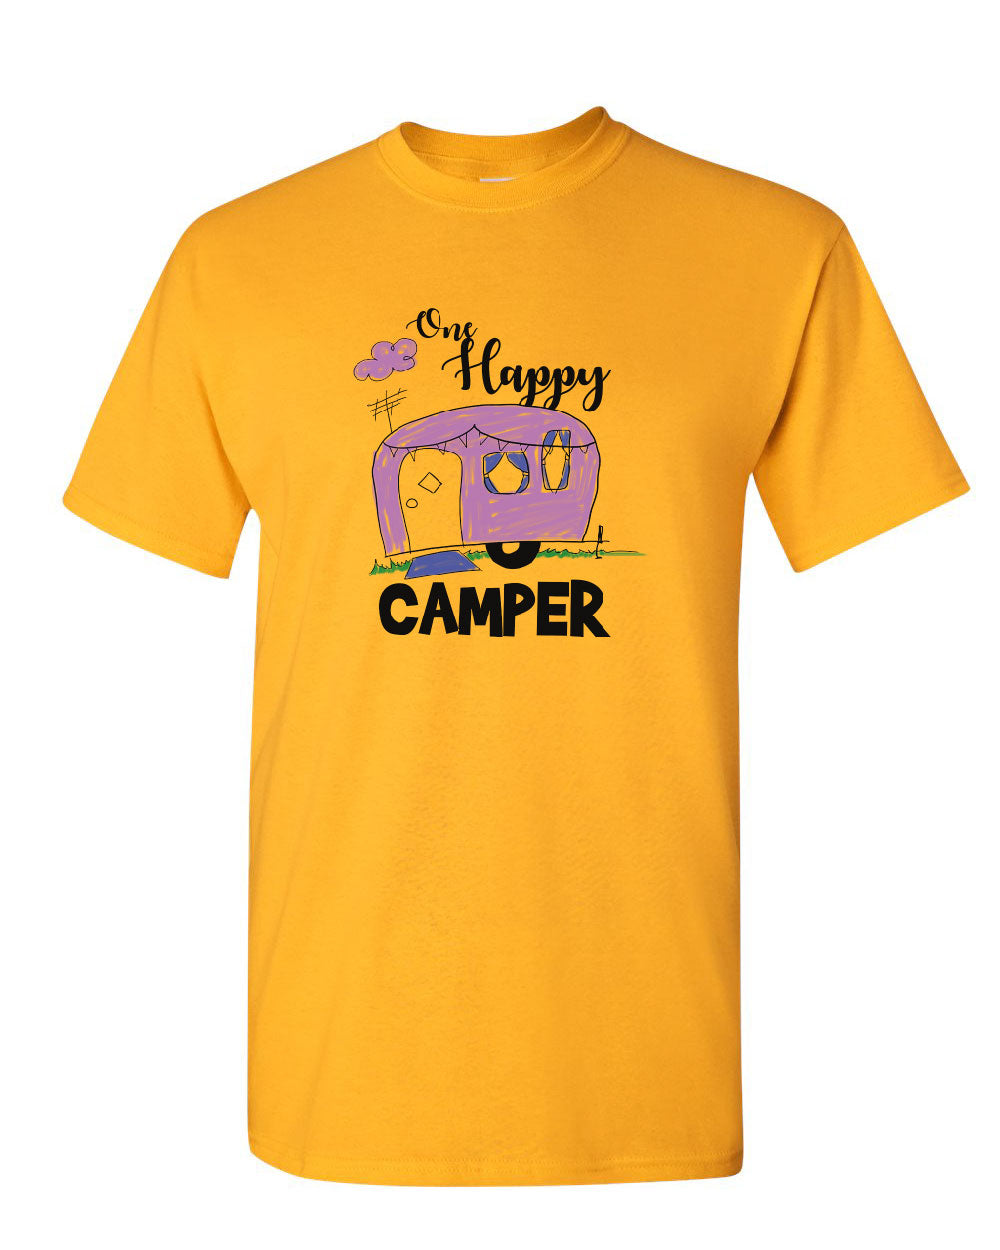 One Happy Camper T-Shirt RV Trailer Camping Nature Wilderness Mens Tee ...